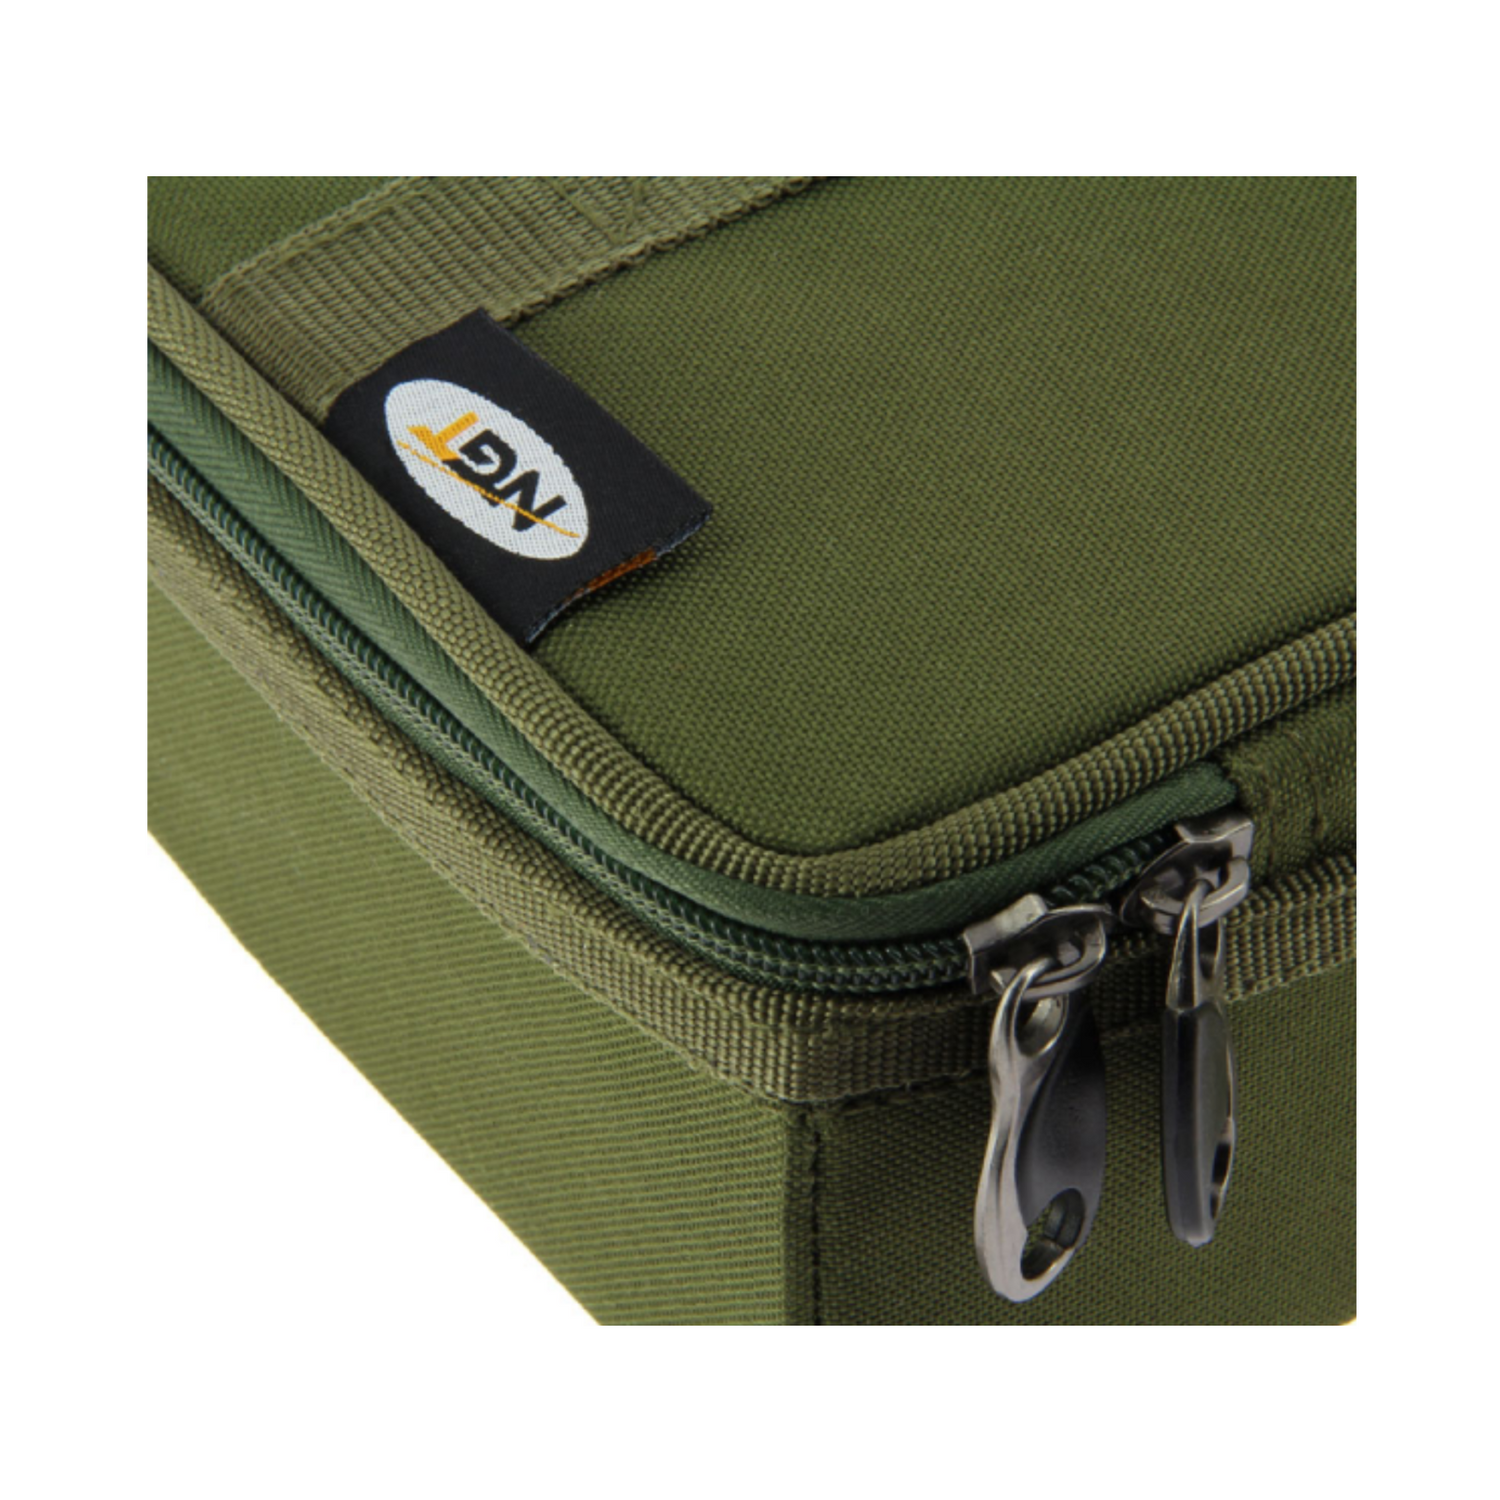 NGT PVA Rig System 070 - For Complete PVA Storage.